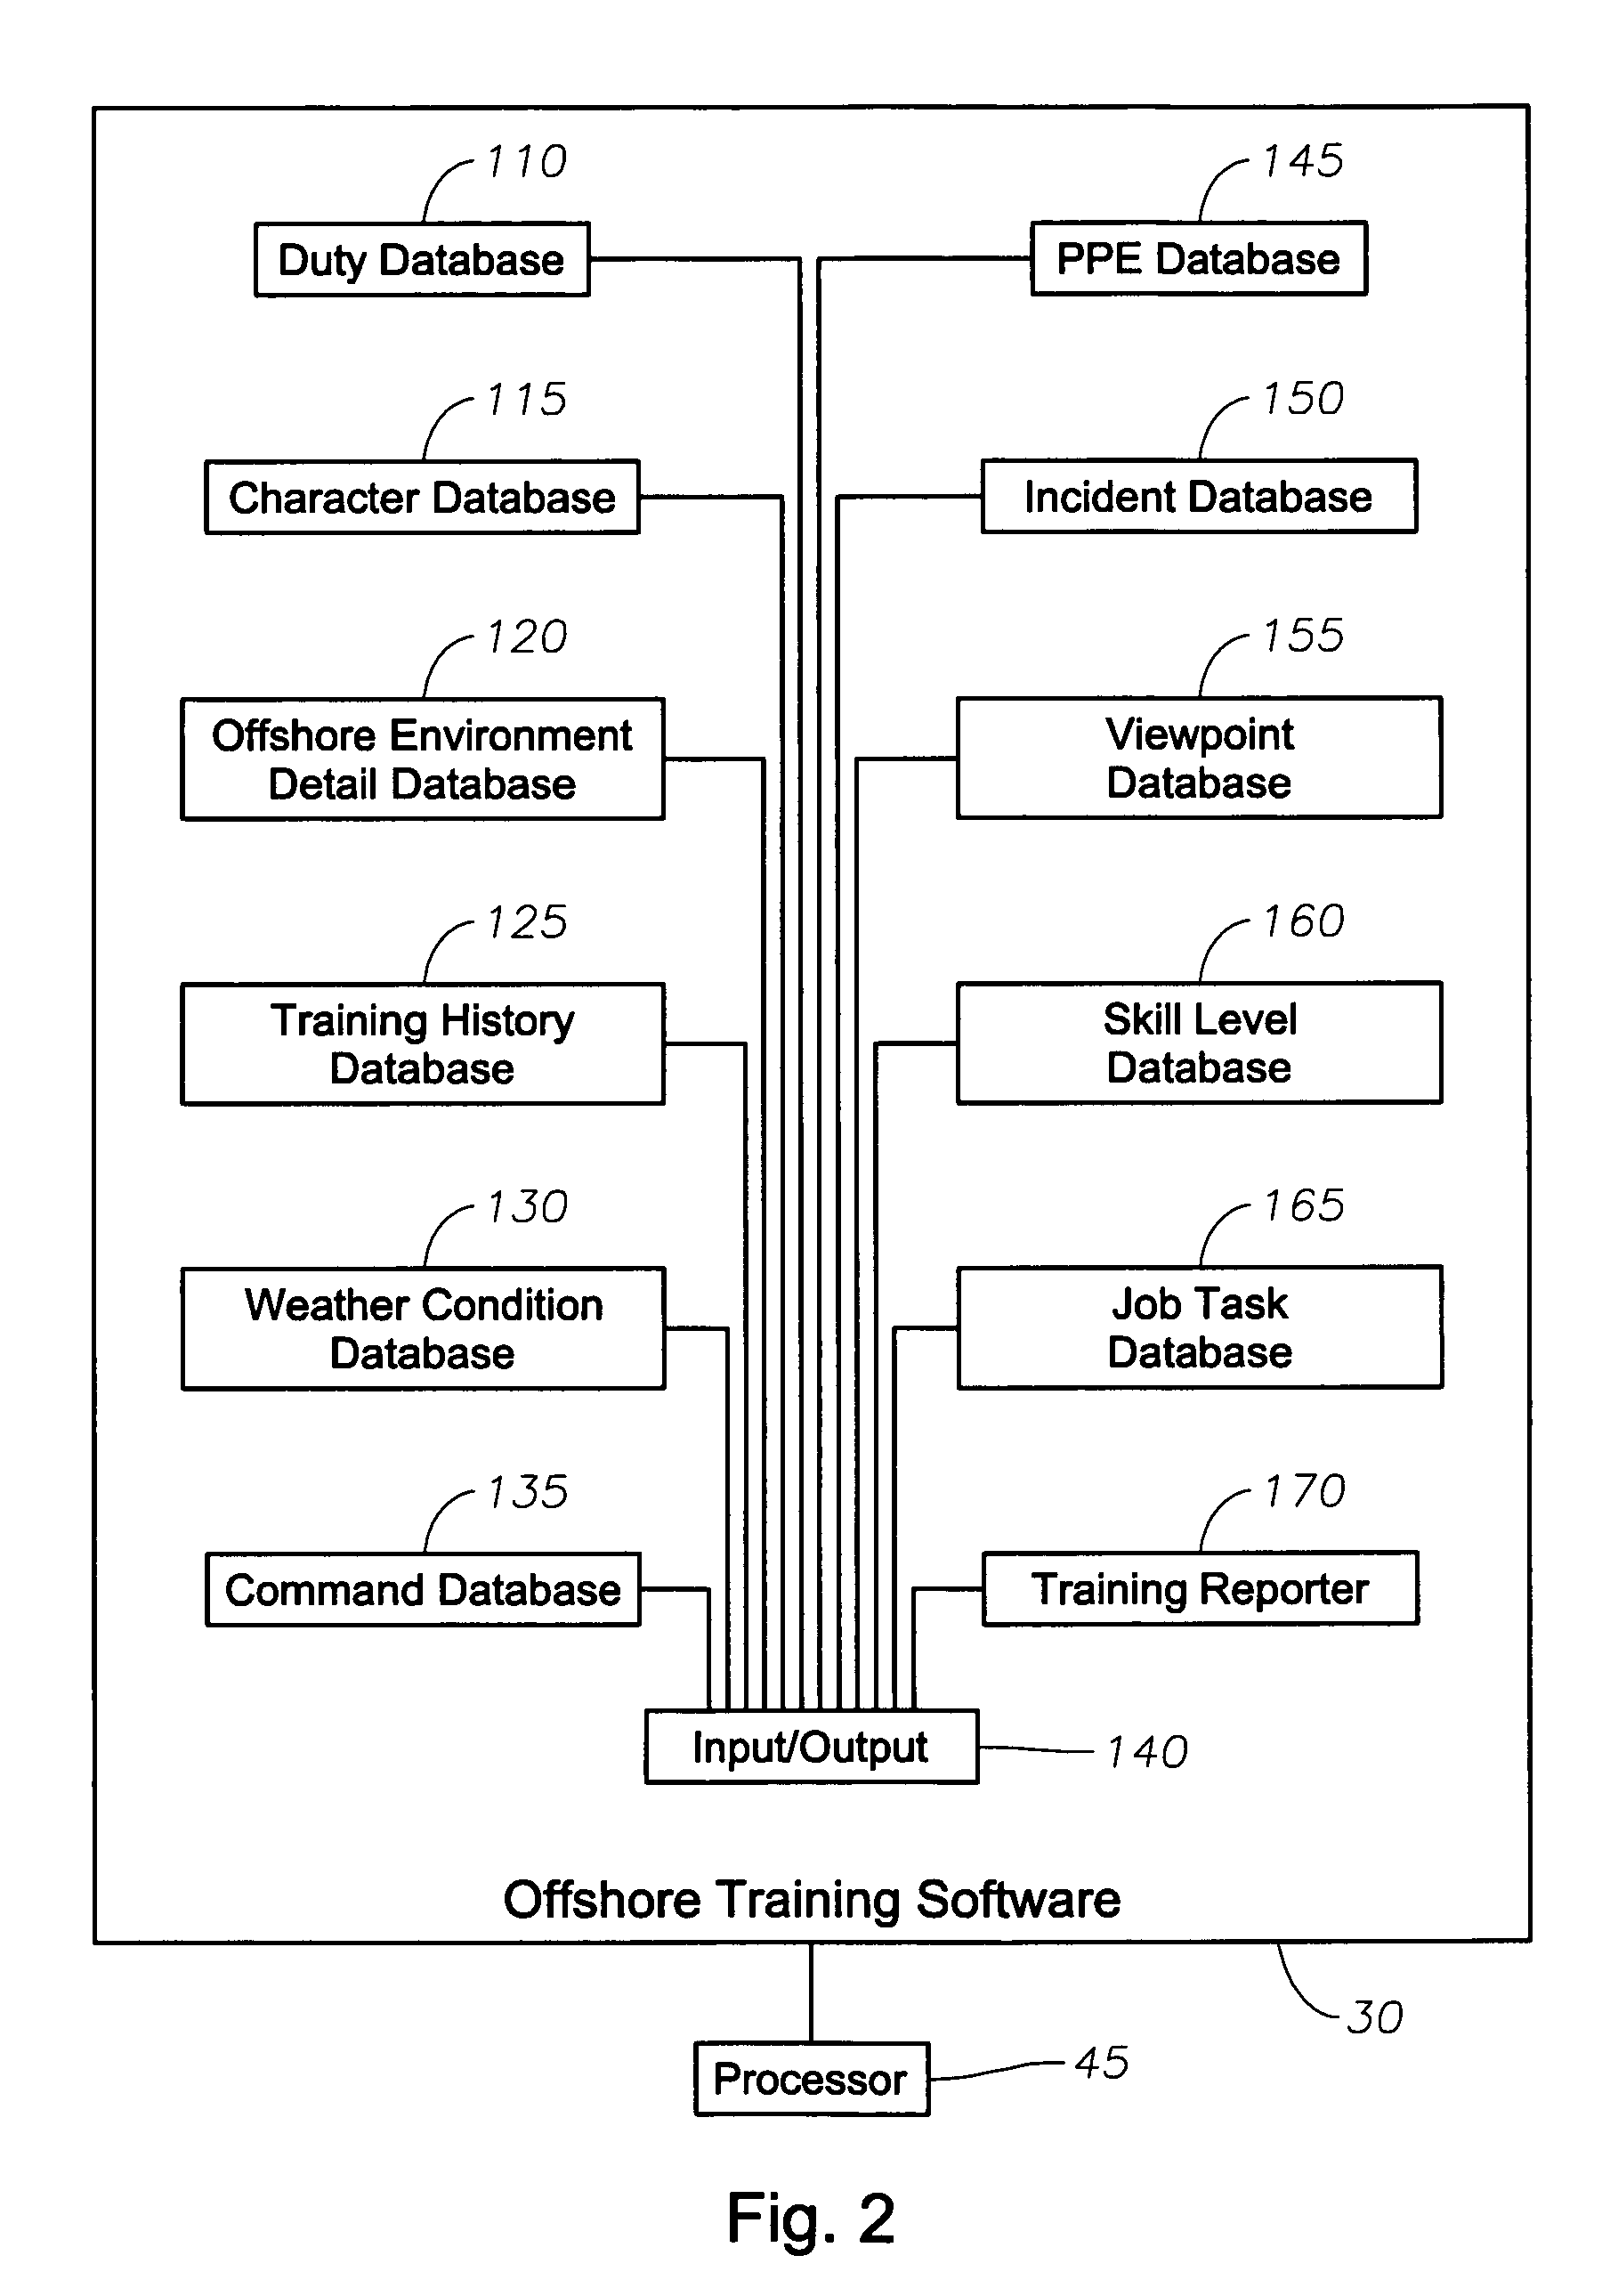 Offshore environment computer-based safety training system and methods